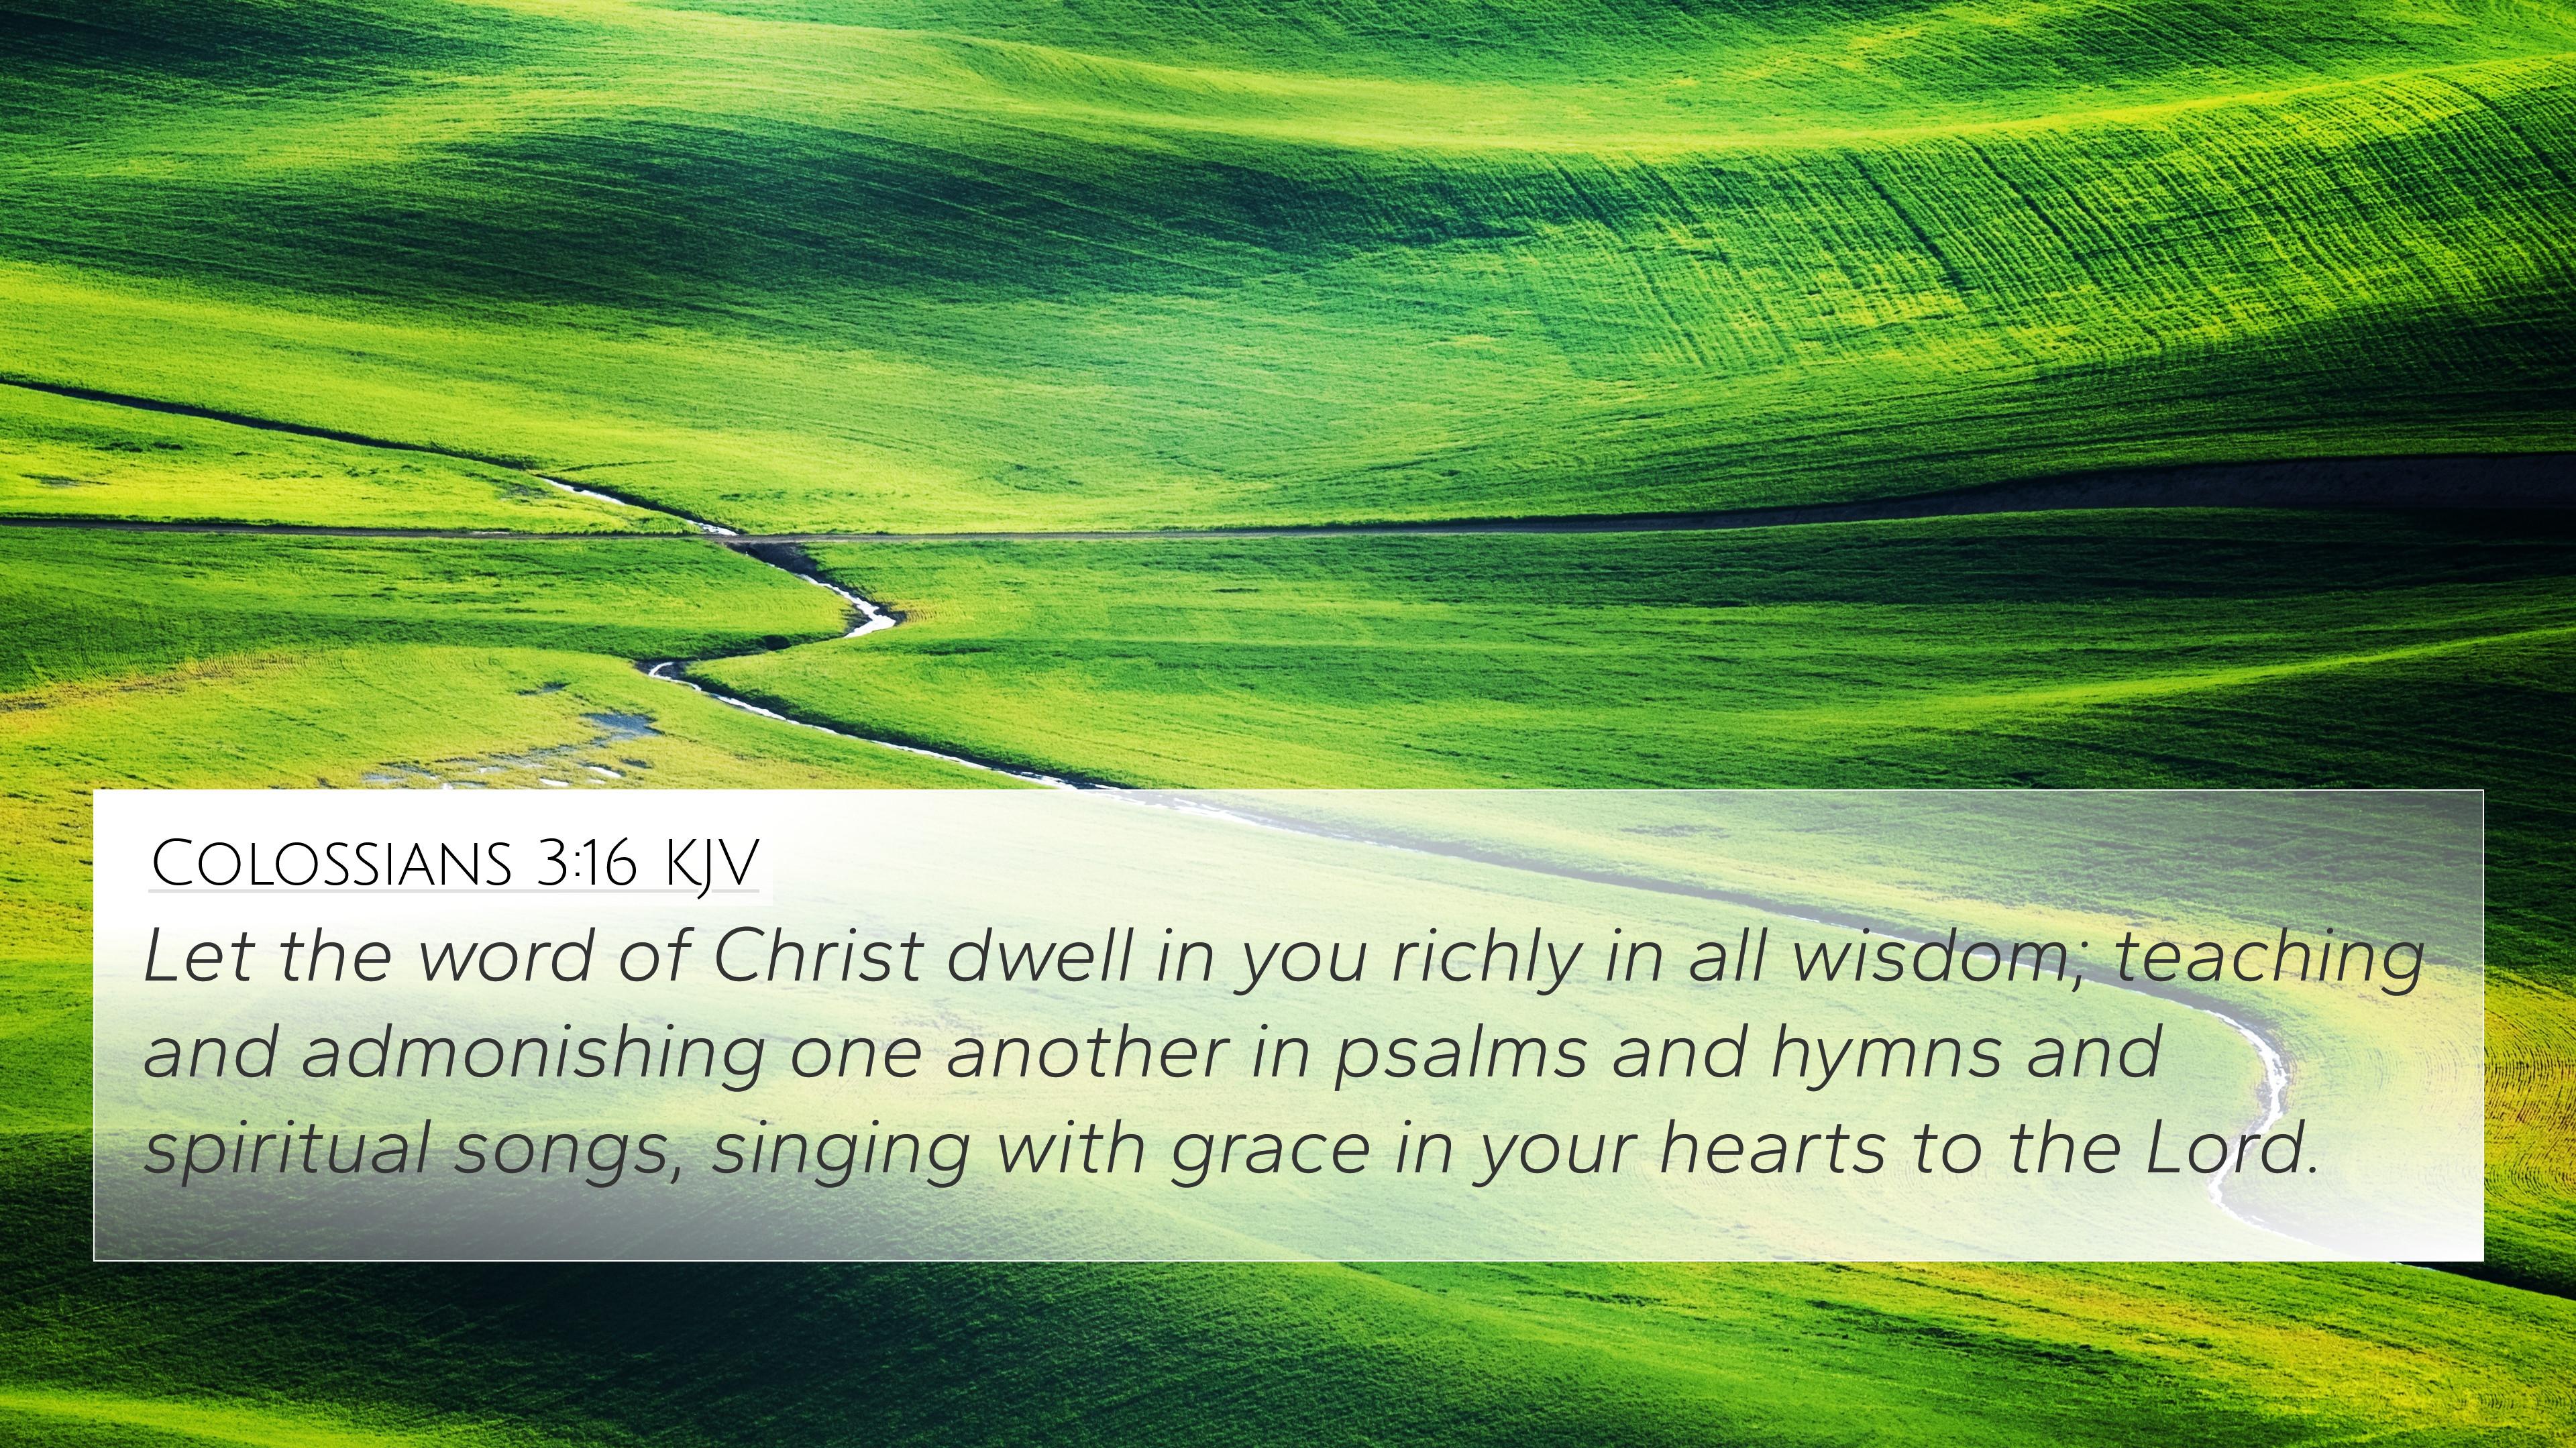 Colossians Kjv 4k Wallpaper Let The Word Of Christ Dwell In